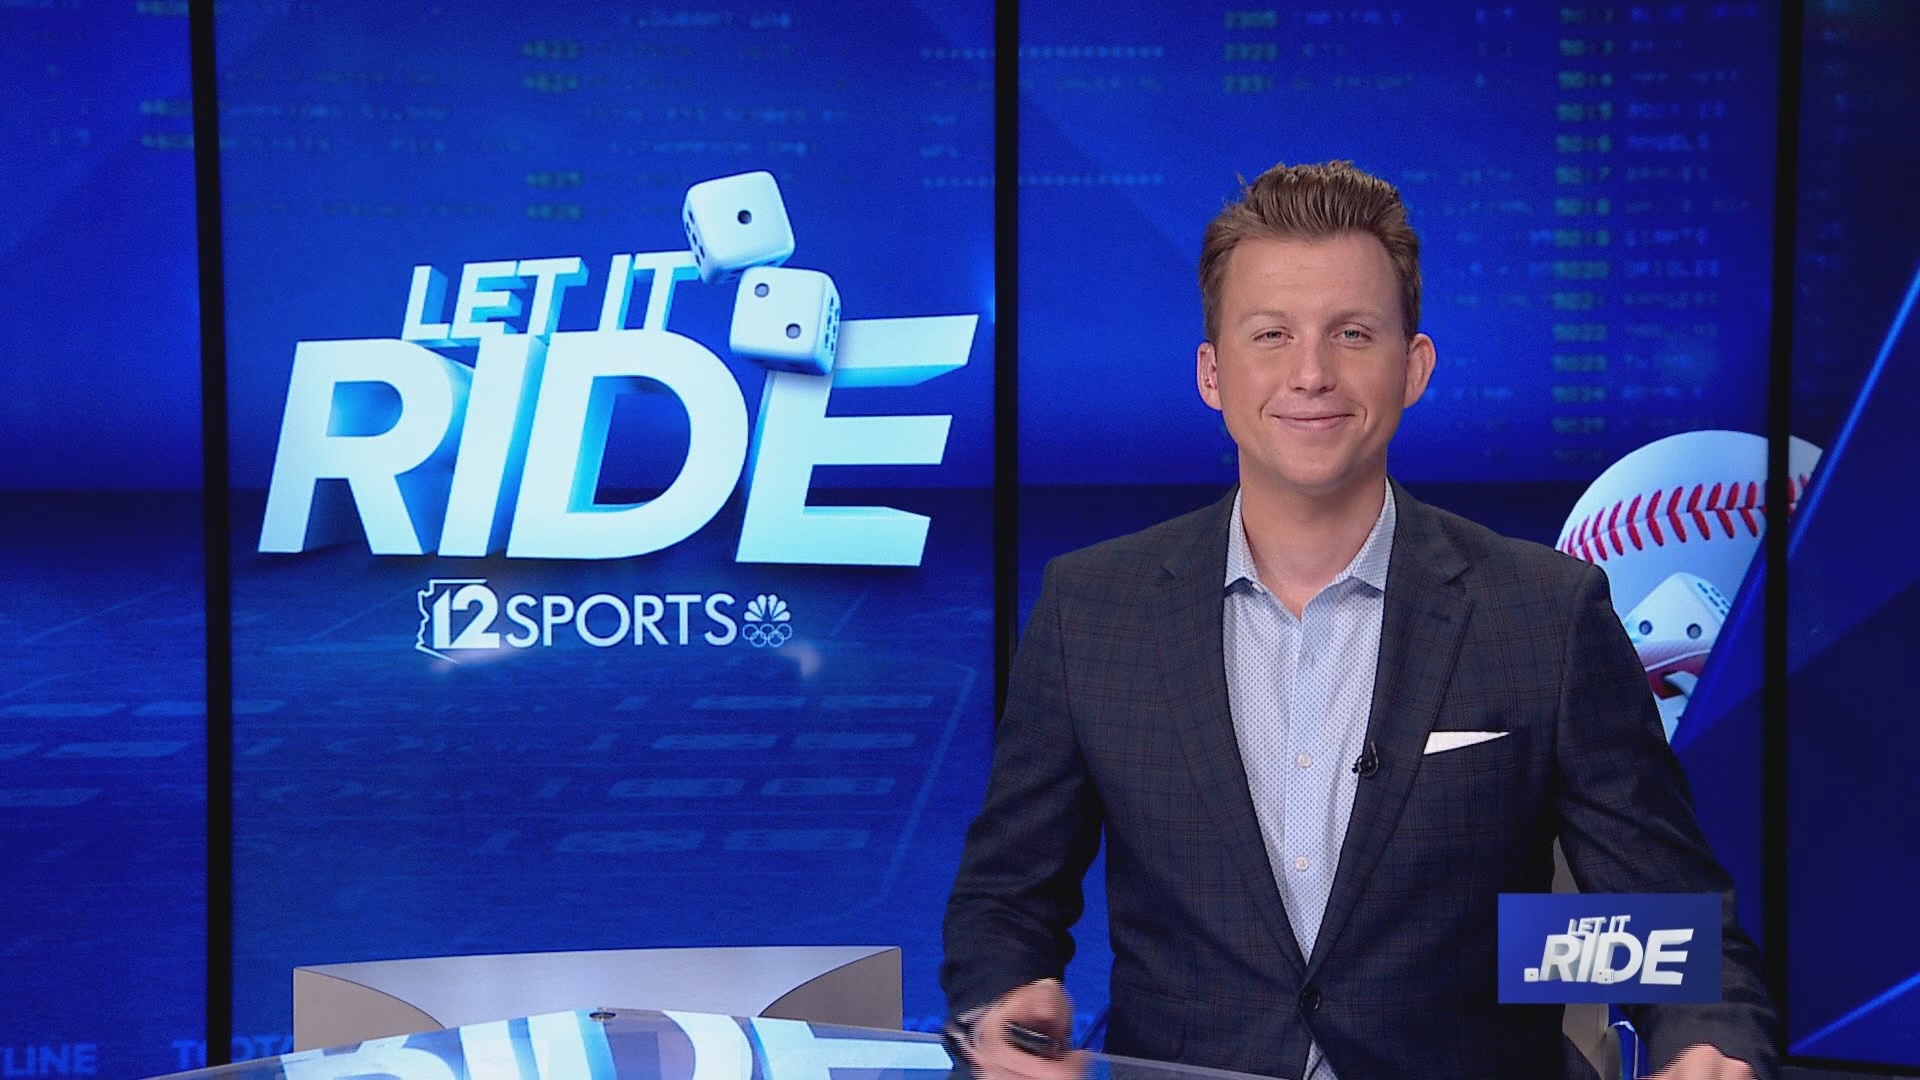 On this jam packed episode of Let it Ride, Luke Lyddon chops it up with sports analyst Taylor Mathis to help you make the most informed wagers possible.